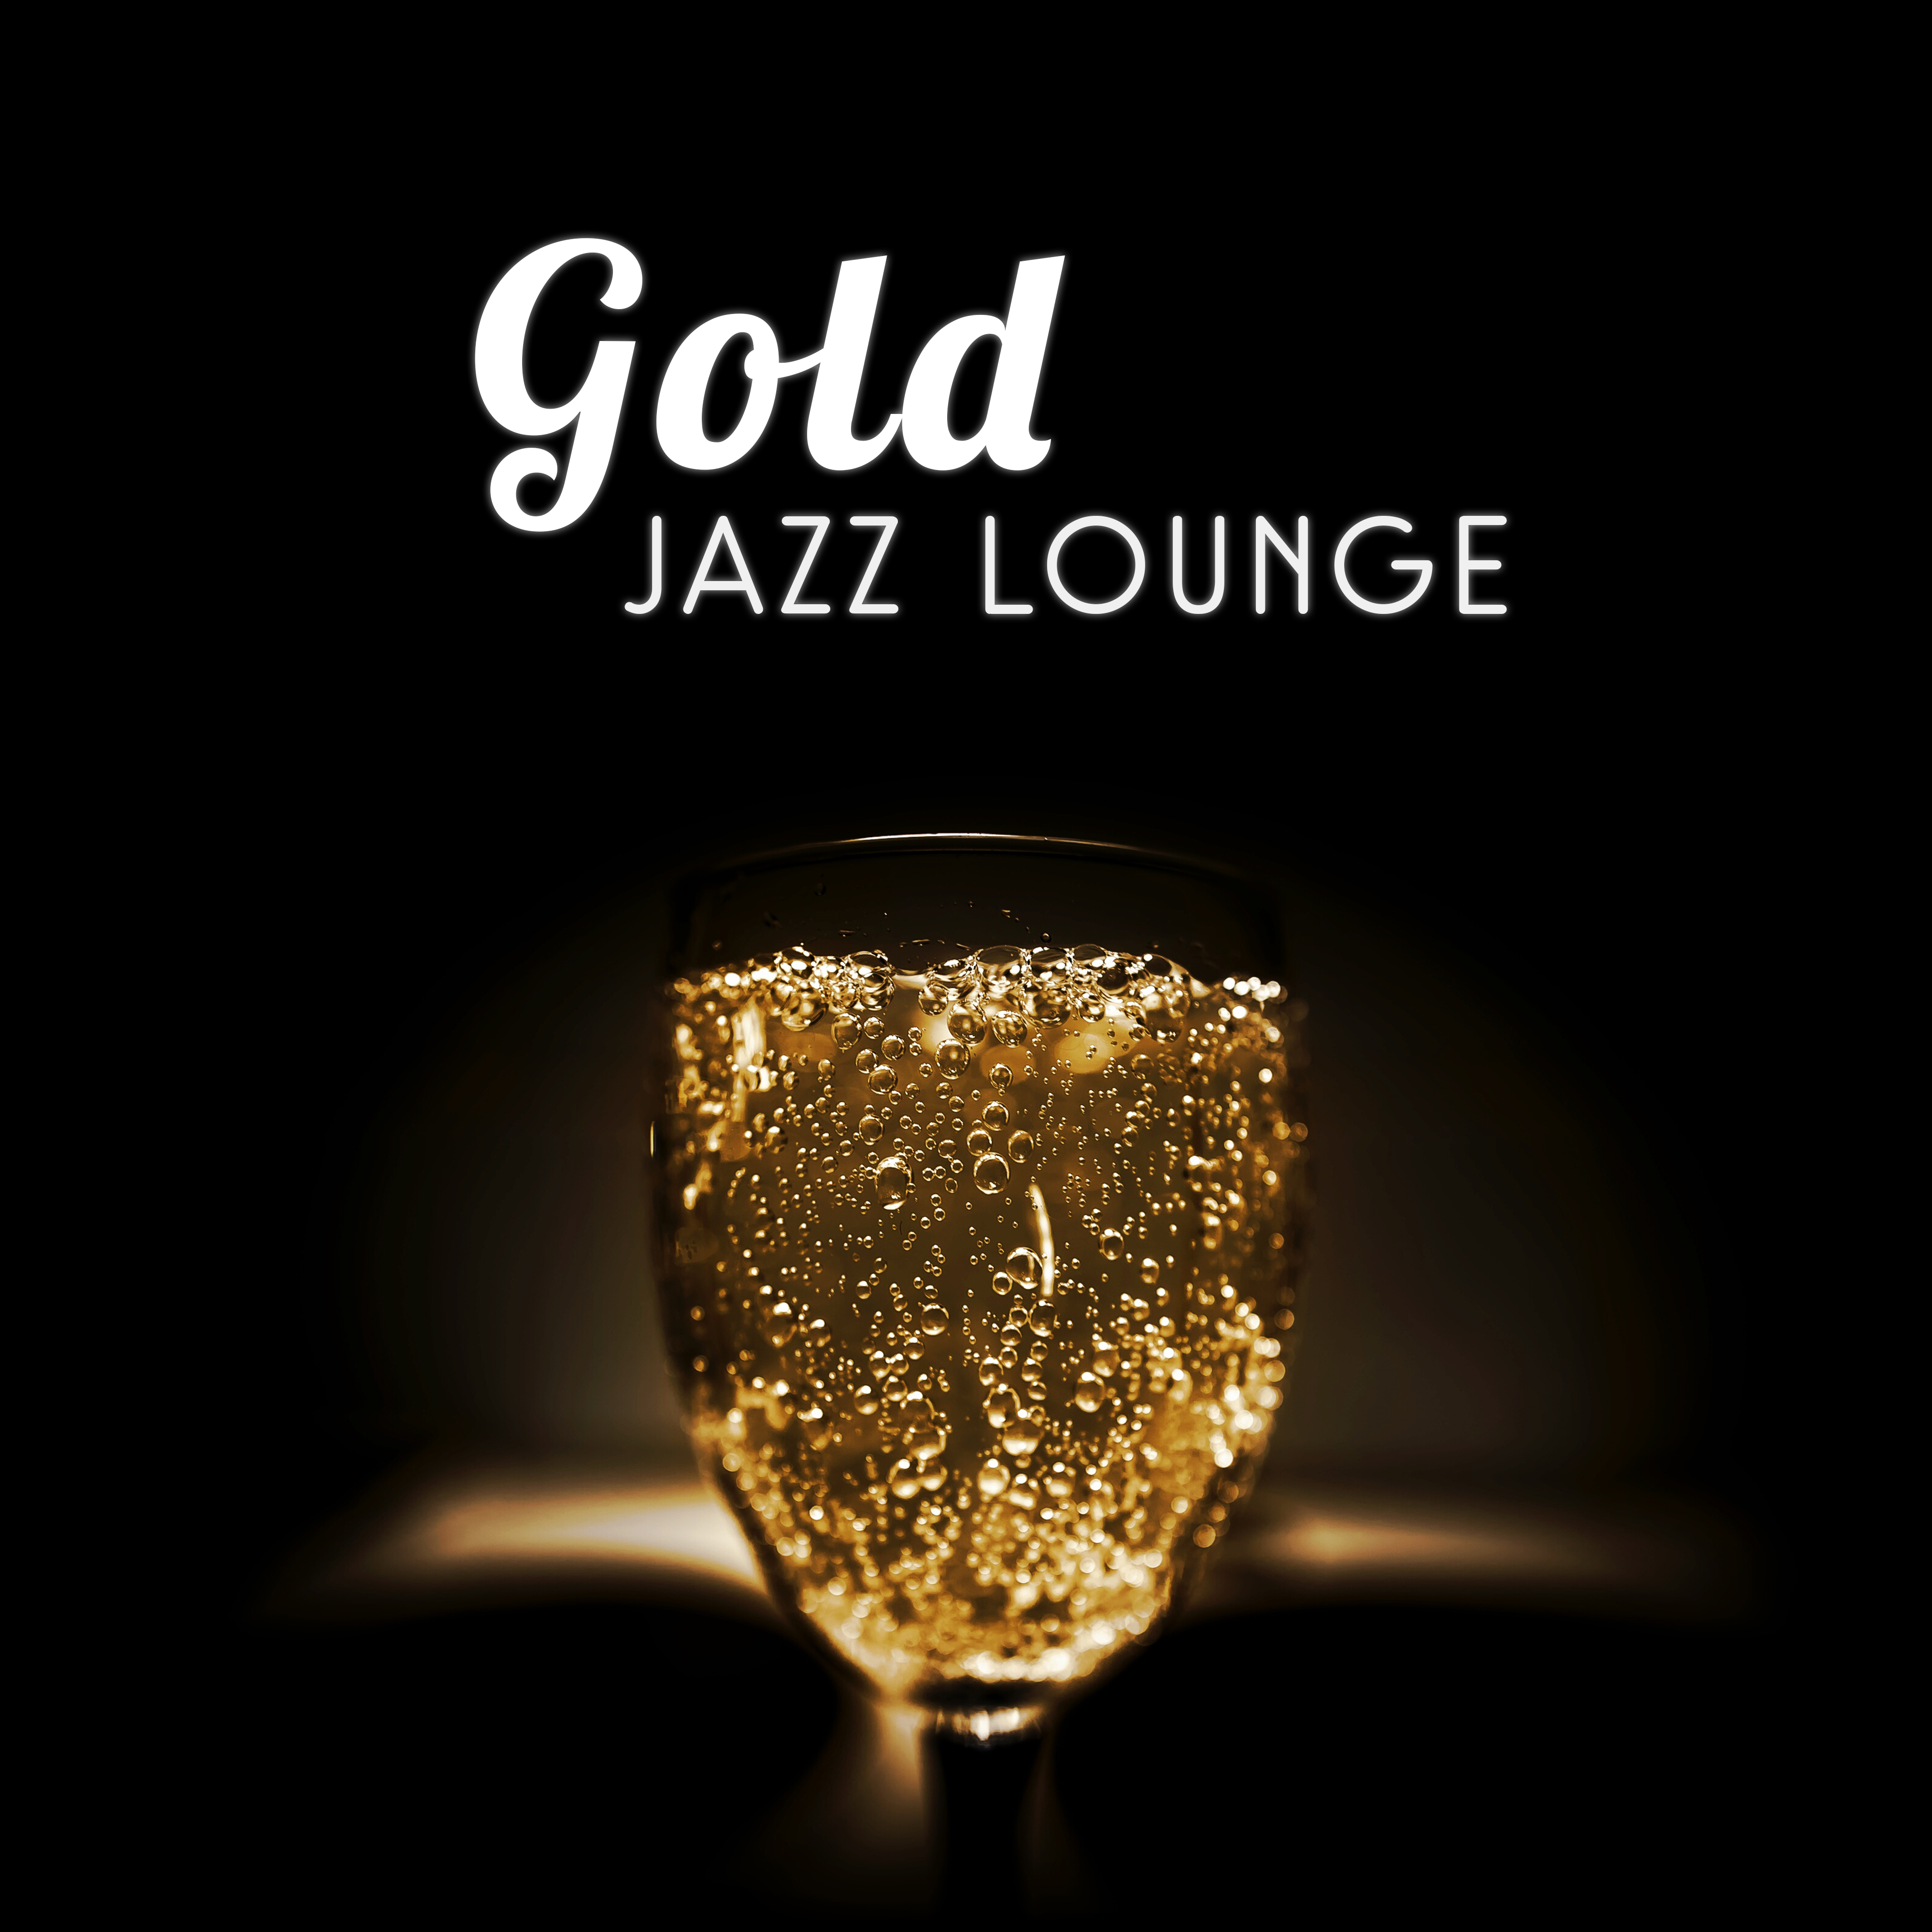 Gold Jazz Lounge – Gold Piano Sounds, Relaxed Jazz Lounge, Smooth Jazz